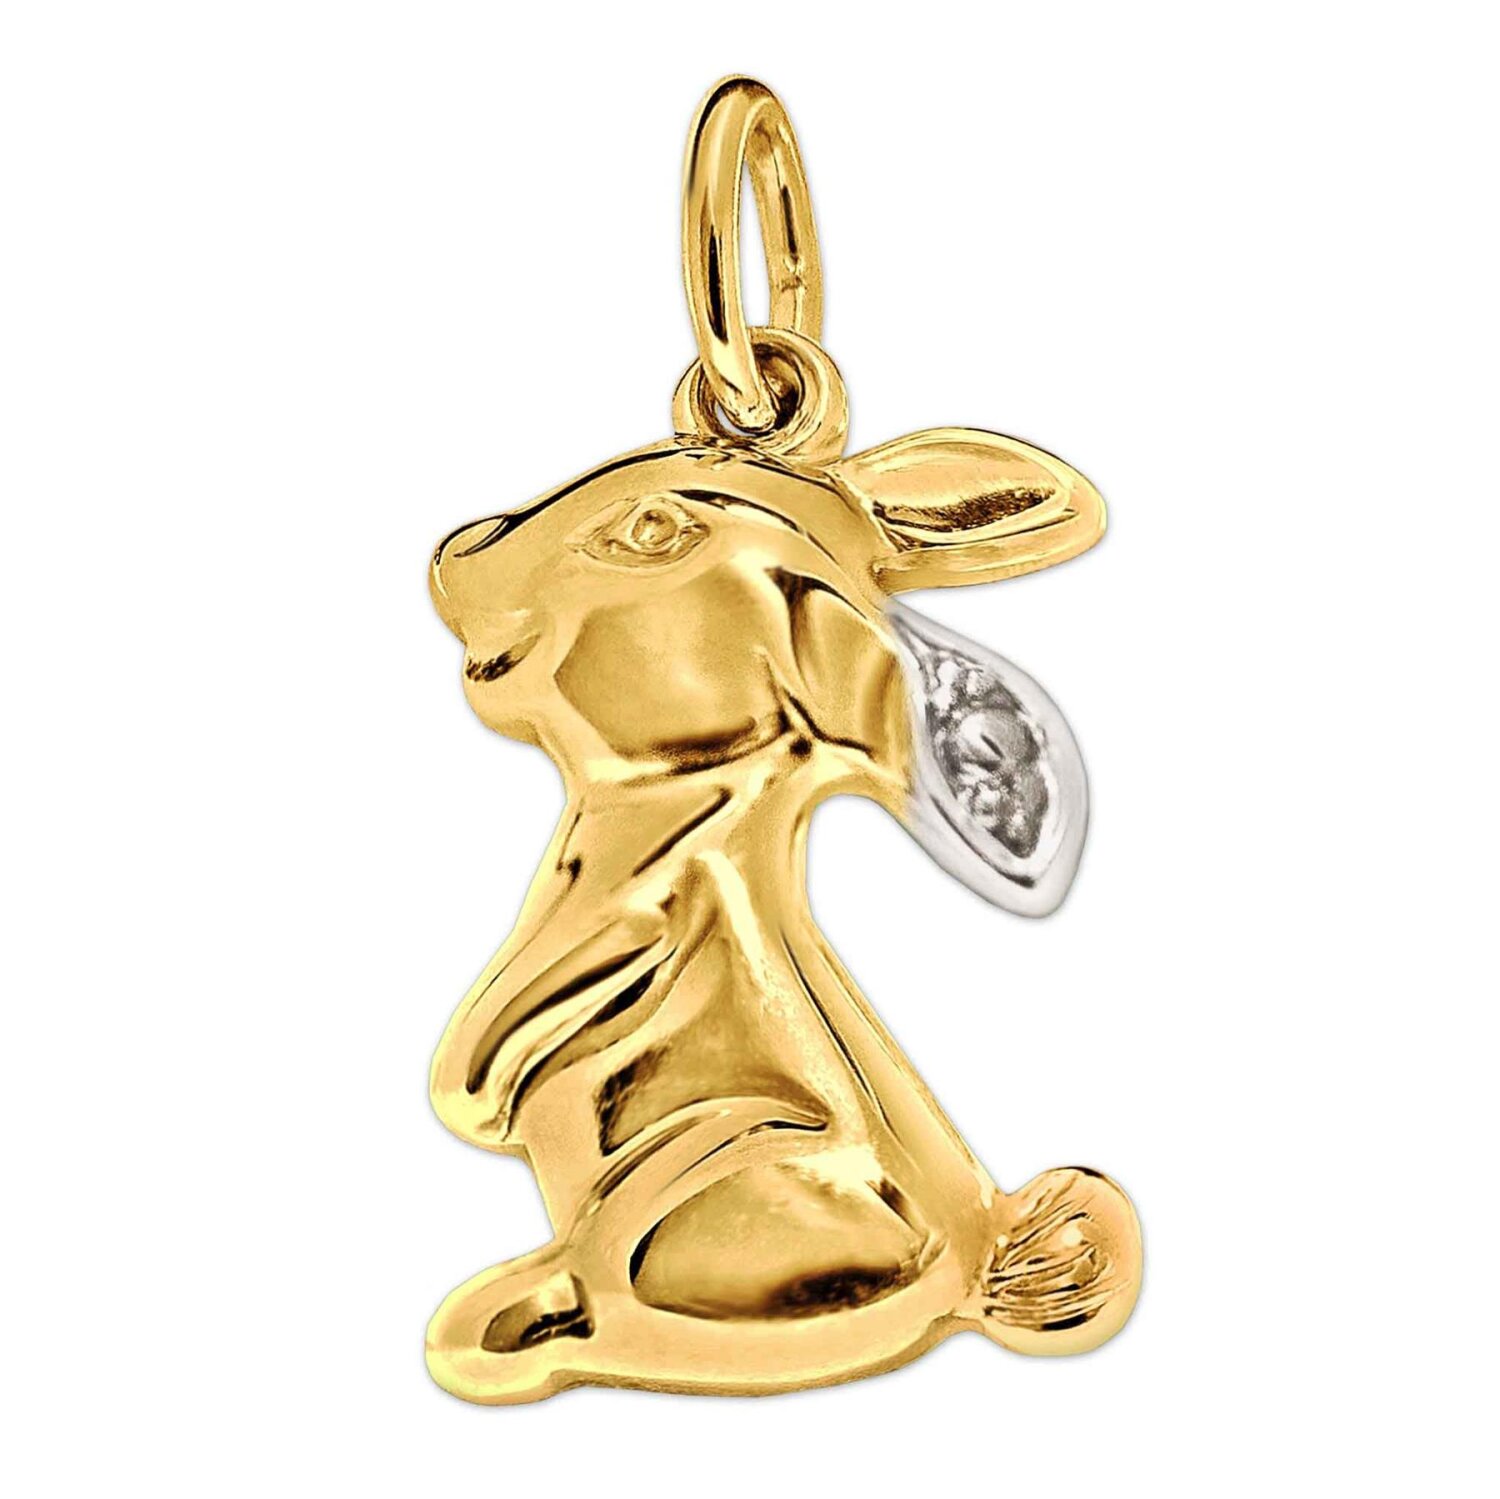 Anh&auml;nger Hase 14 x 9,5 mm bicolor 333 Gold